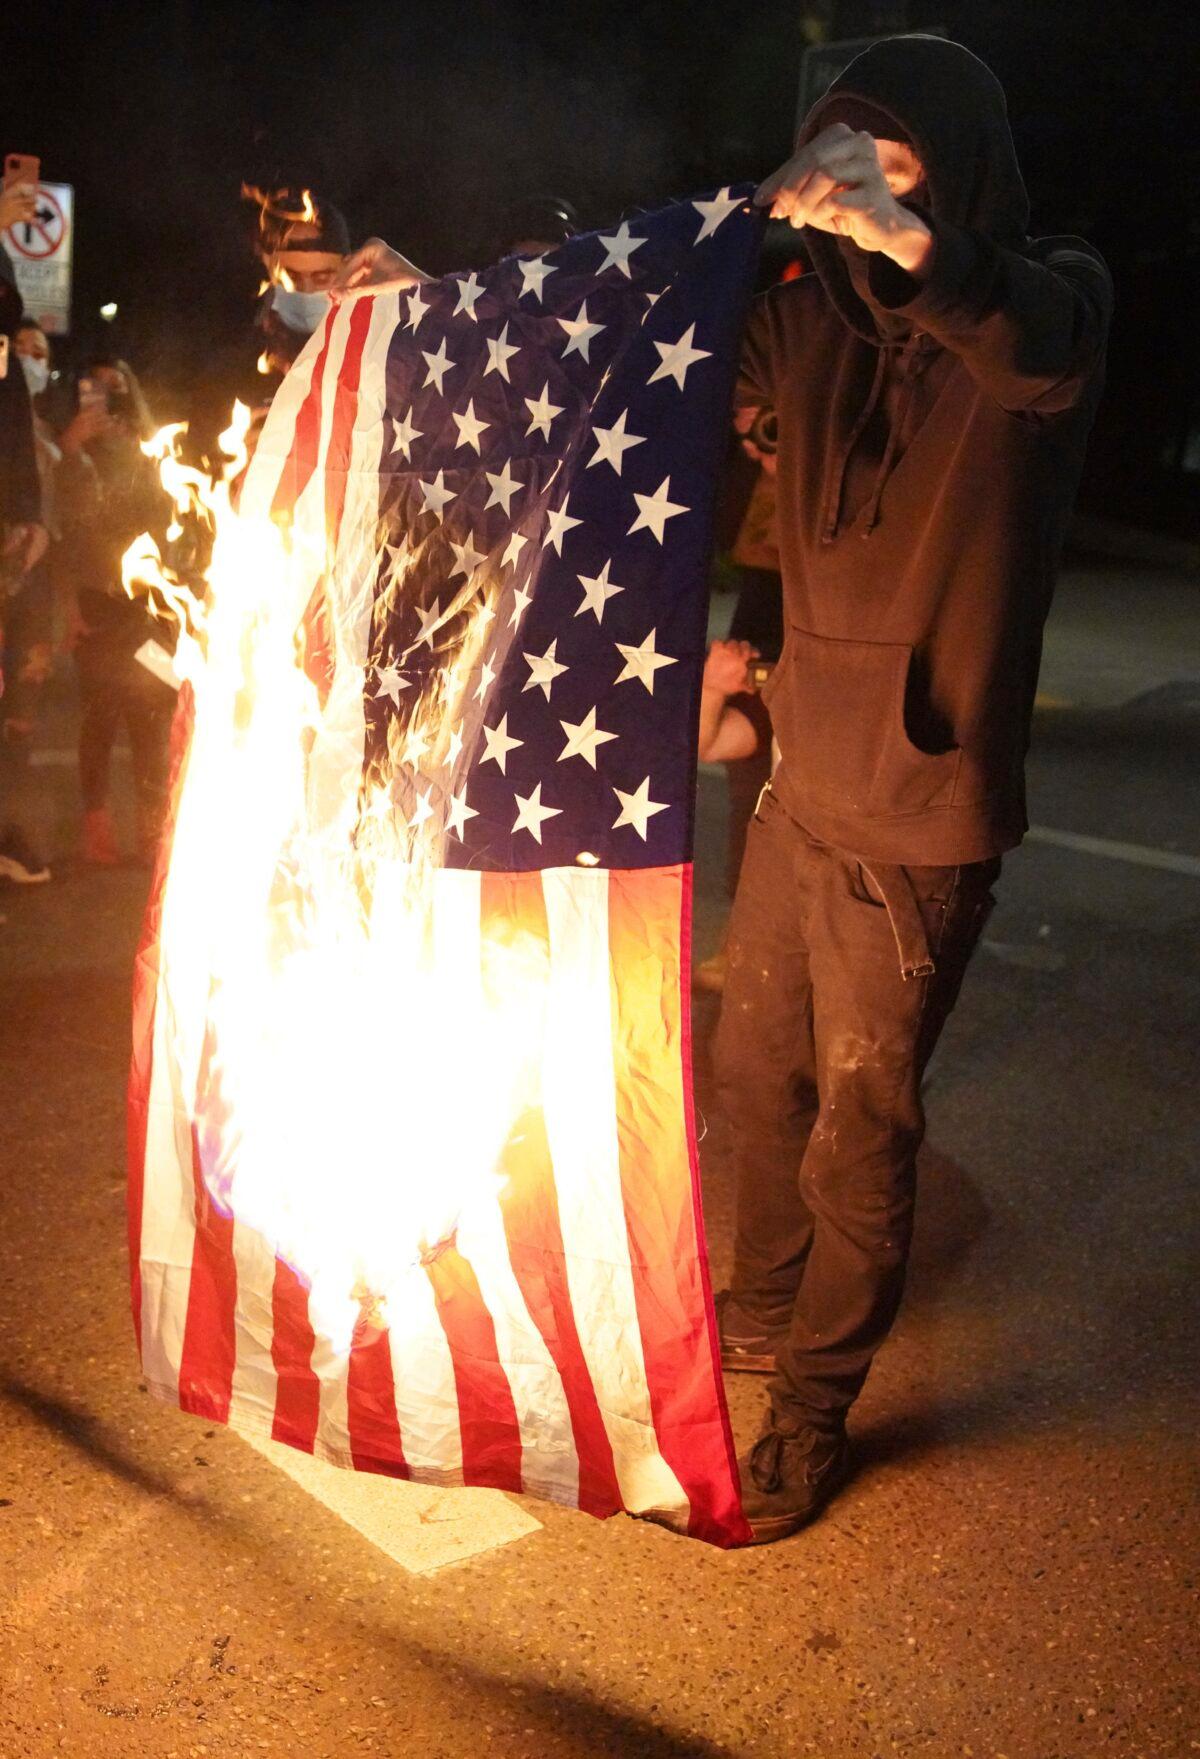 A protester burns an American flag while rallying in downtown Portland, Ore., on Sept. 26, 2020. (Allison Dinner/AP Photo)